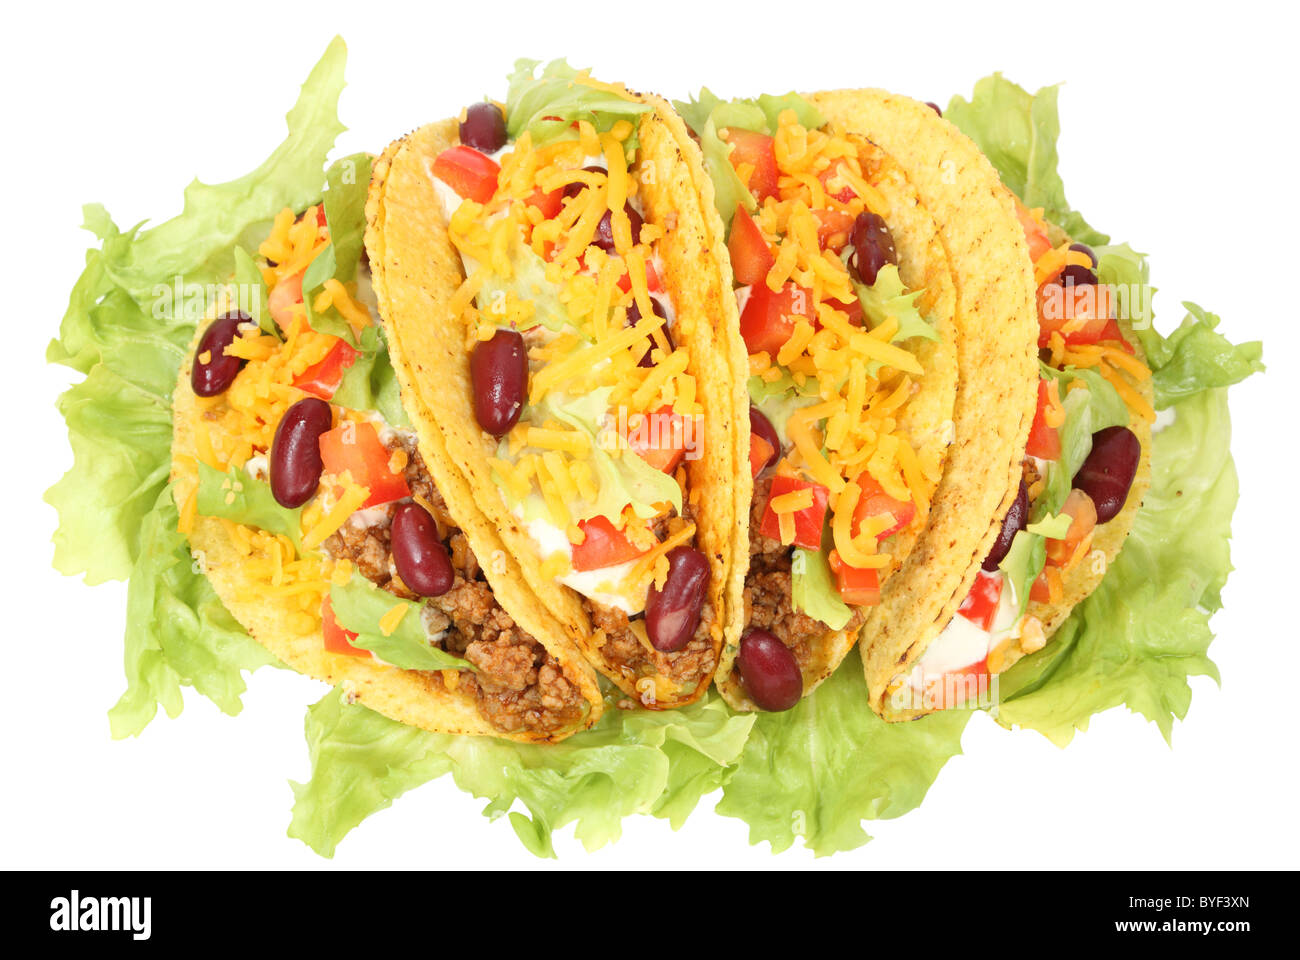 Delicious Mexican tacos isolated over white background Stock Photo